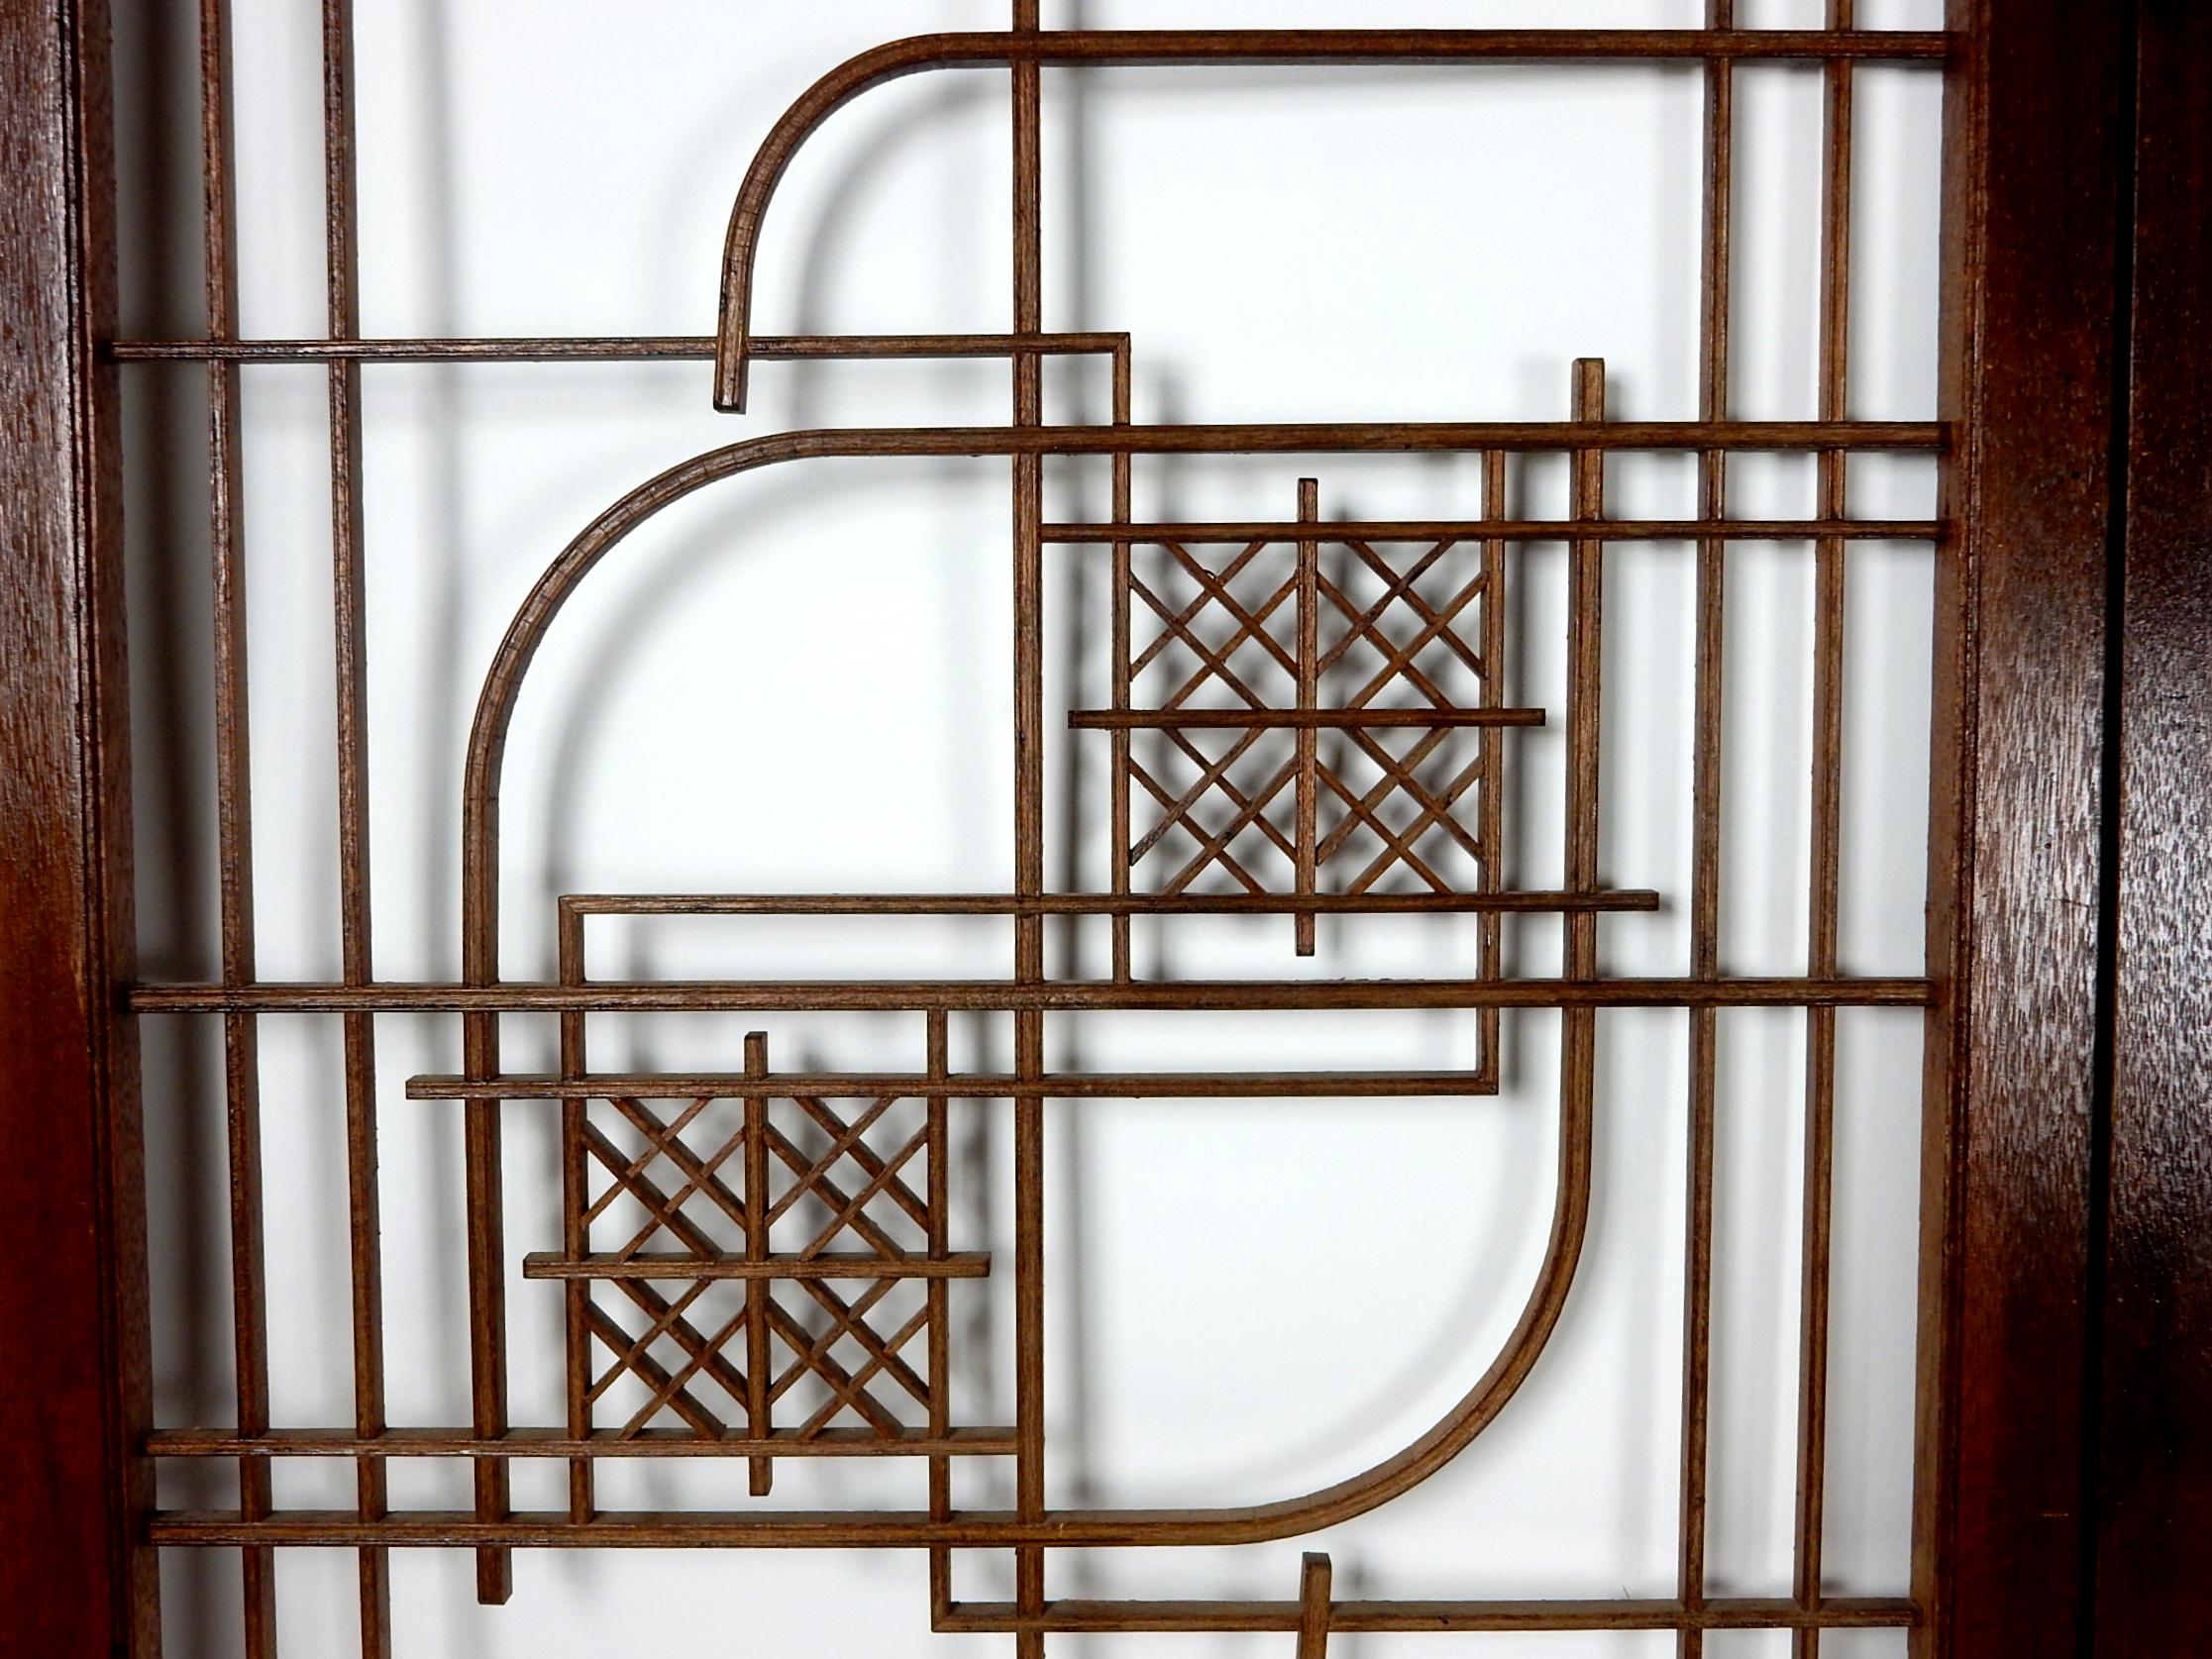 Attributed to Frank Lloyd Wright design this geometric wood window screen, circa 1930's. From a bungalow estate in the Broadmoor area of Colorado Springs, CO.
Hand crafted with fine detail. Panels are hinged together with a period metal hinge,